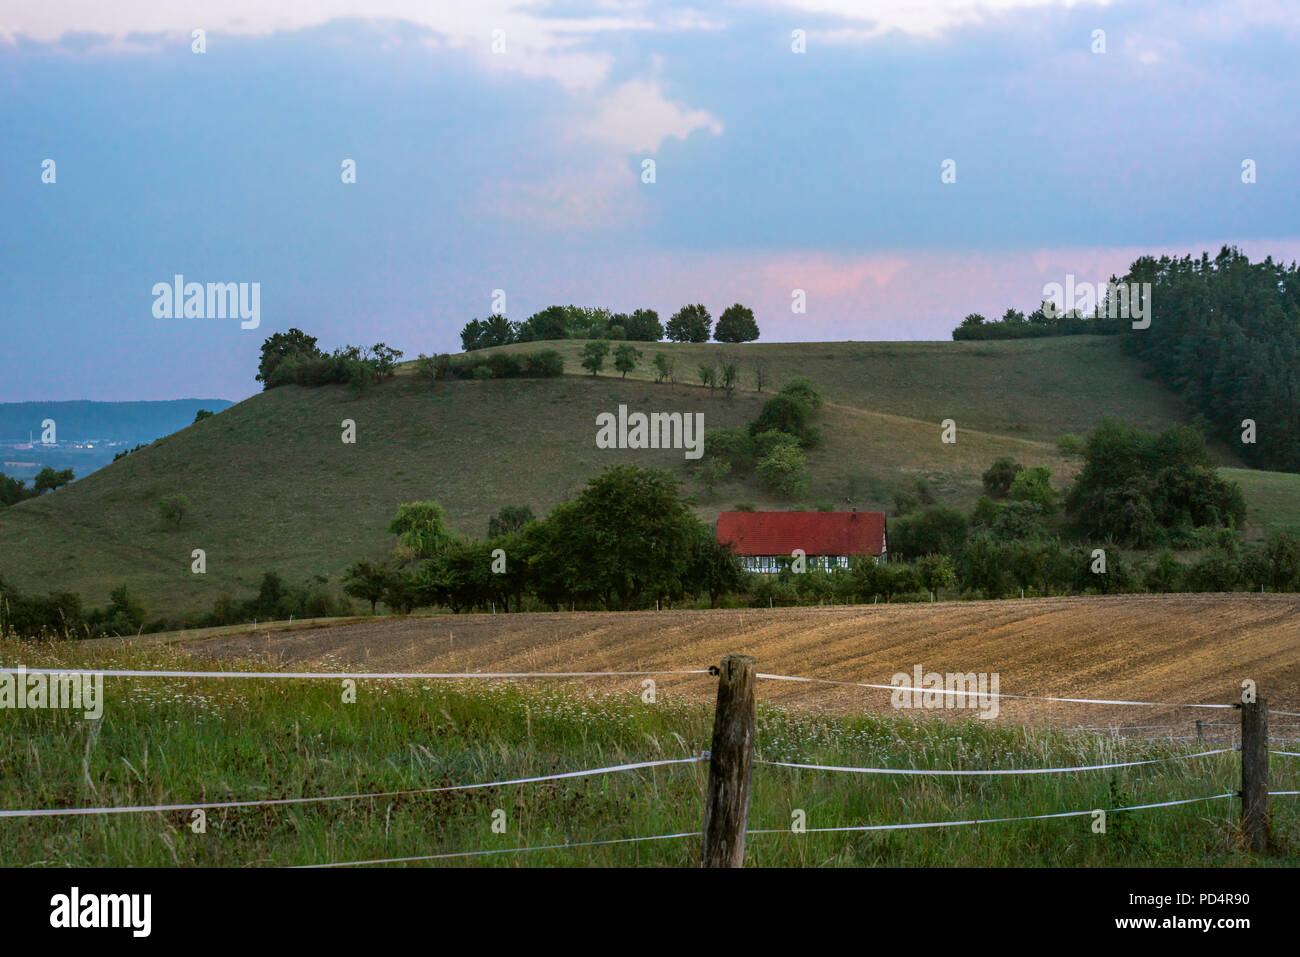 Landscape with a single German house surrounded by trees, hills, blooming meadows and agricultural fields, at blue hour near Michelbach town, Germany. Stock Photo